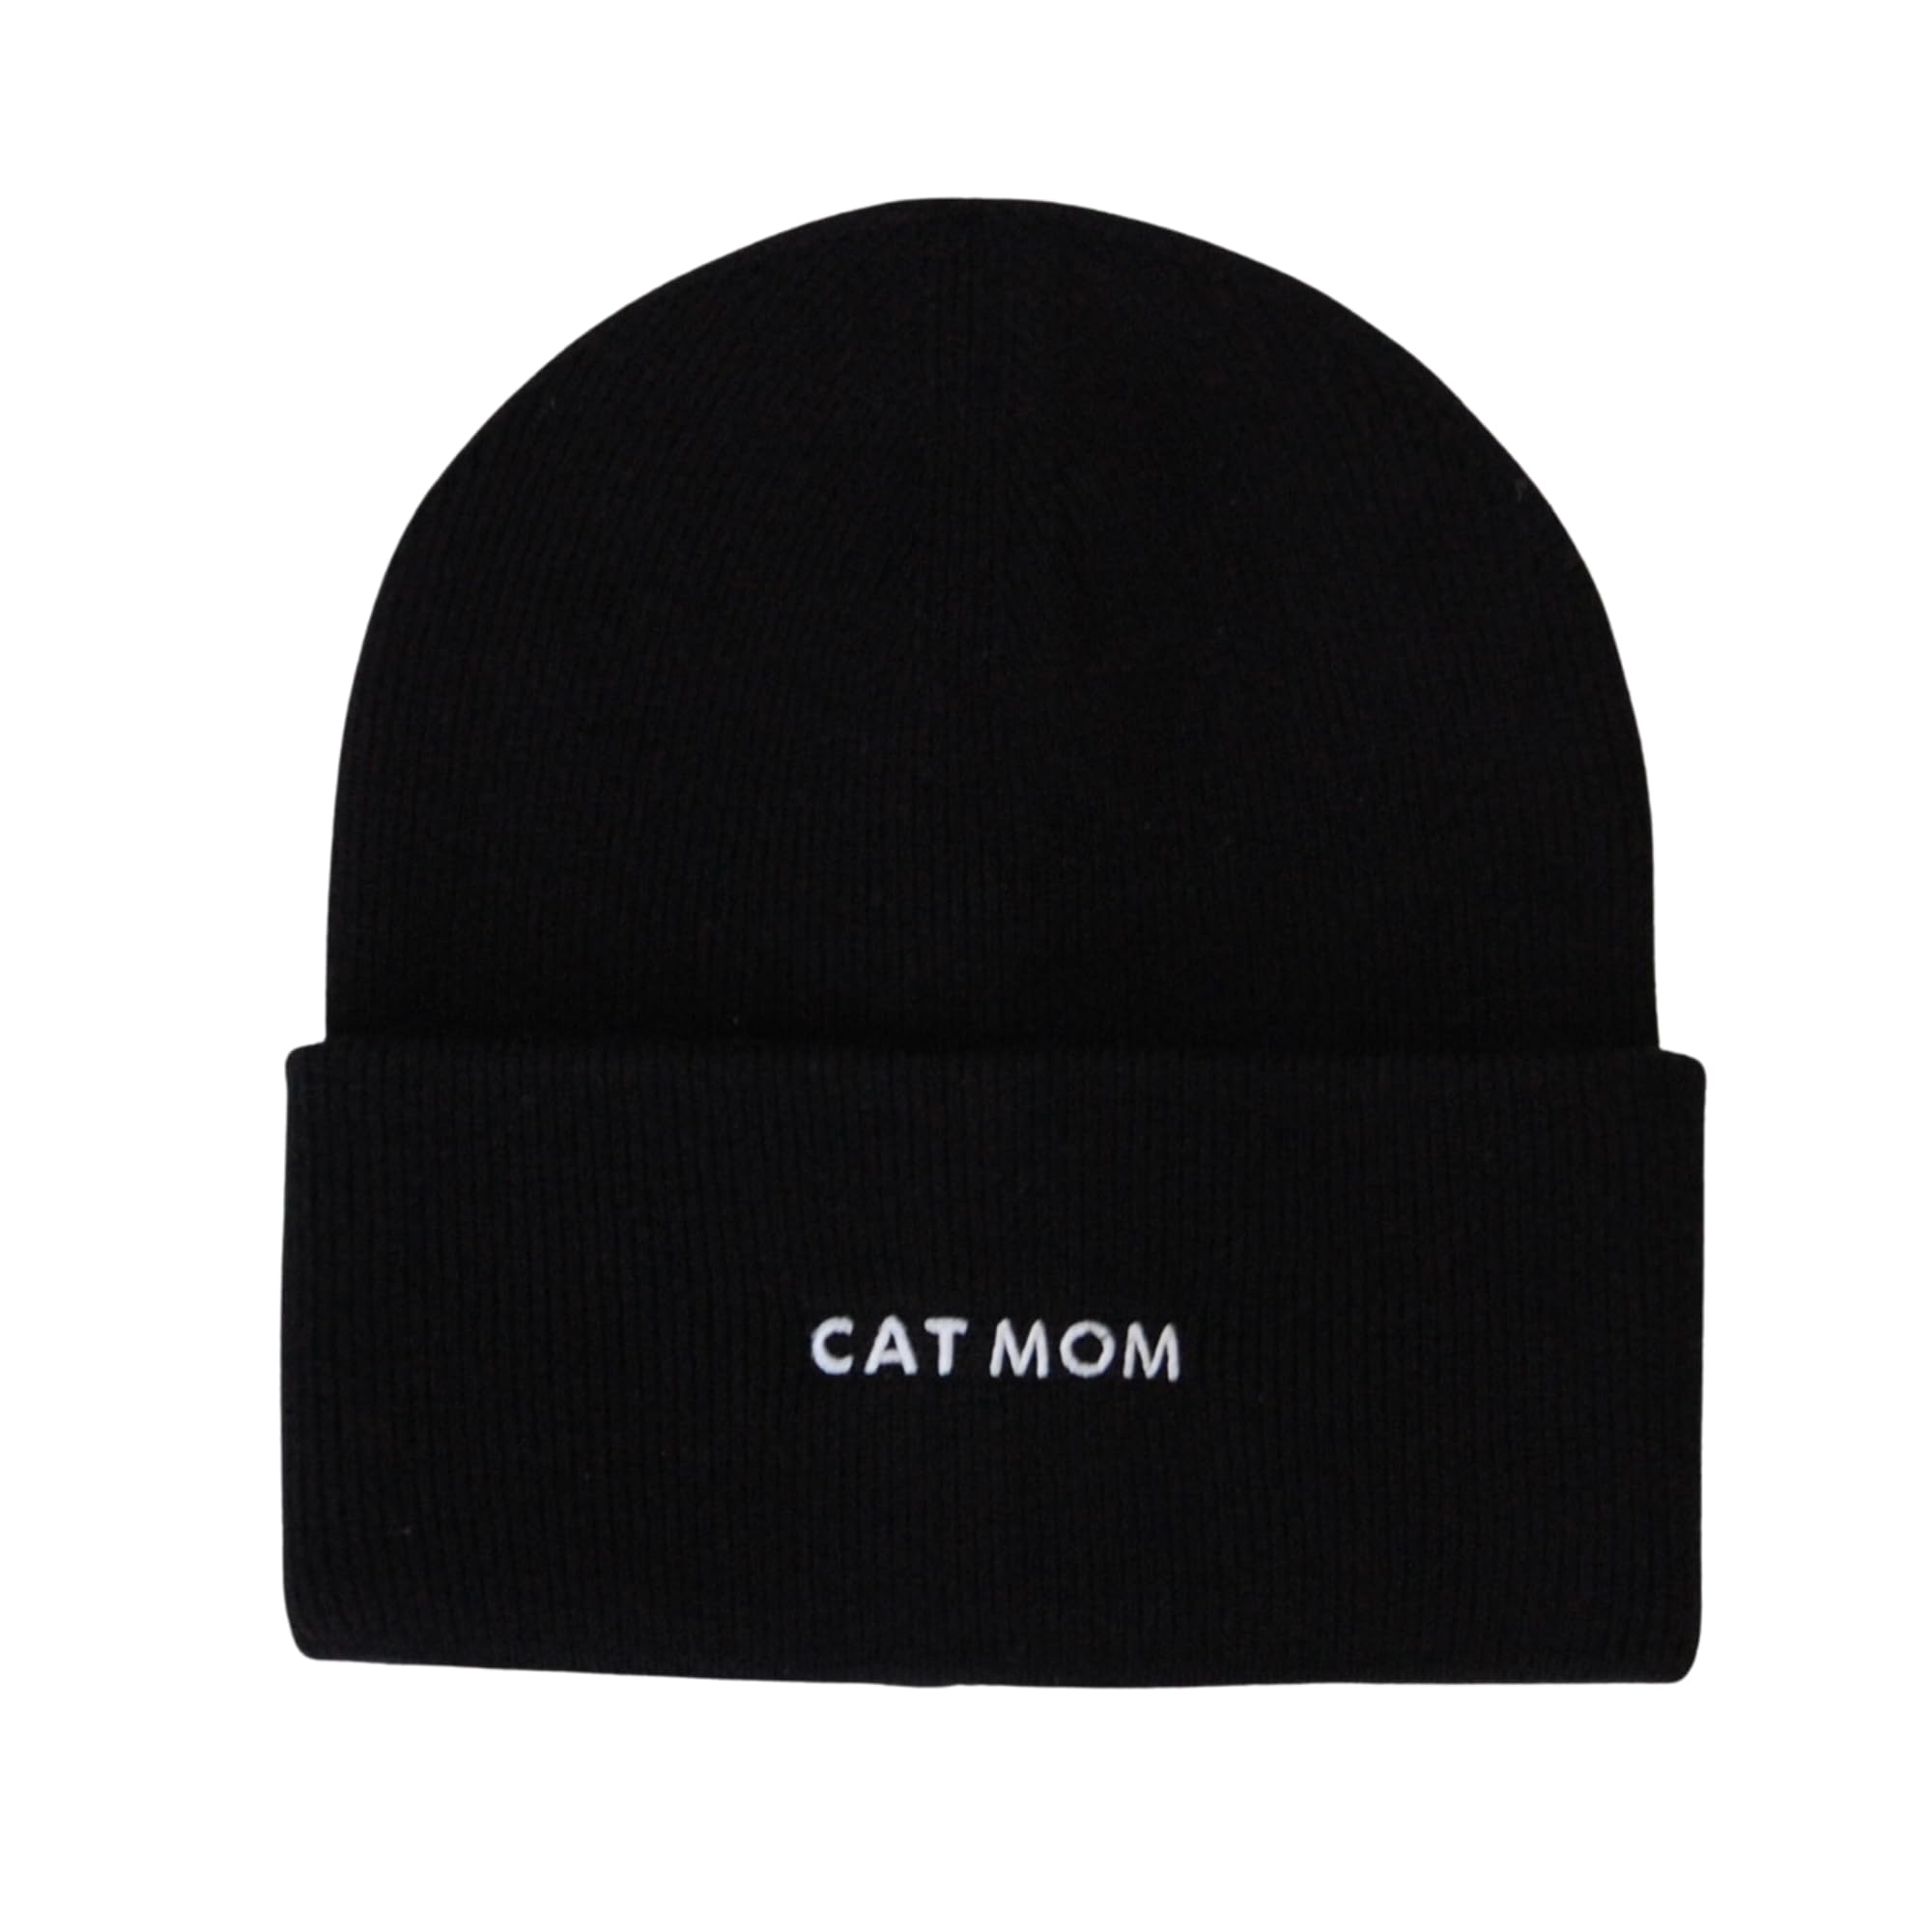 Cat Mom Embroidered Beanie Black Knit Hat Pet Lover Beanie Hat Hatodm